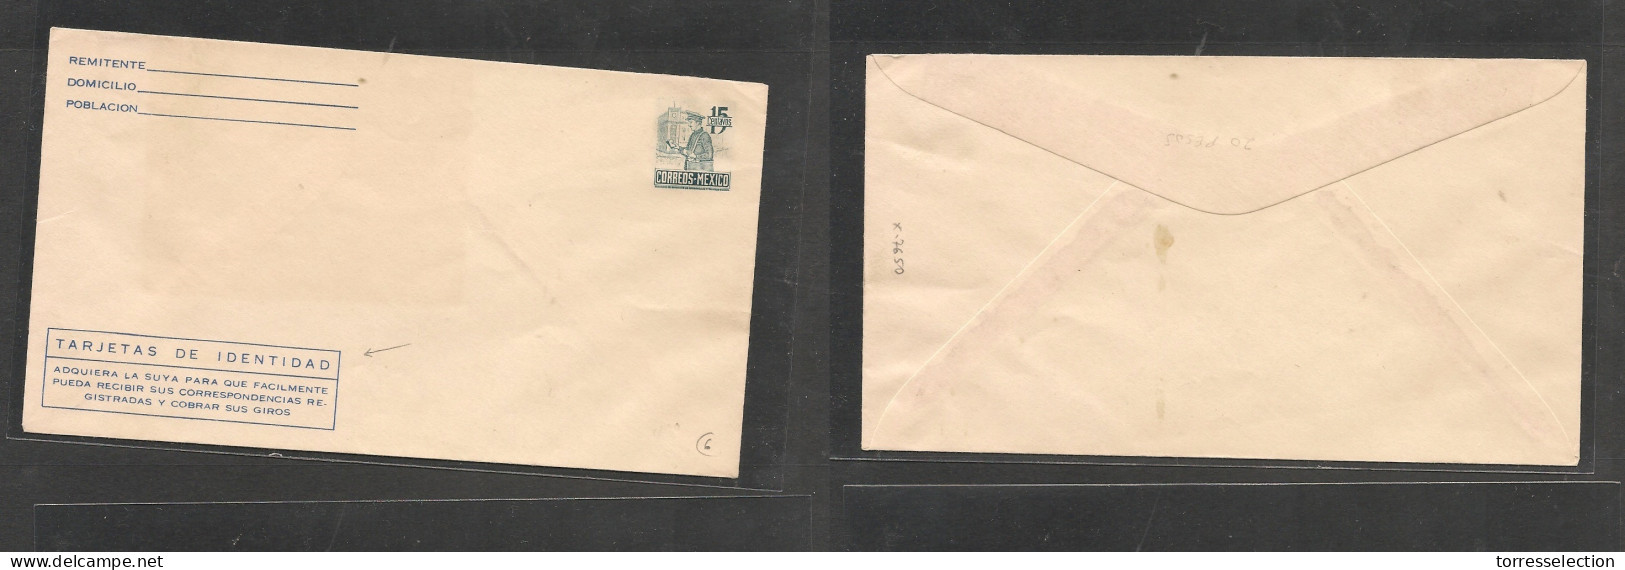 MEXICO. Mexico Cover - C,1940s Stat Env 15c Postman With Identidad Adv Cachet Rinted, Mint, Fine XSALE. - Mexiko